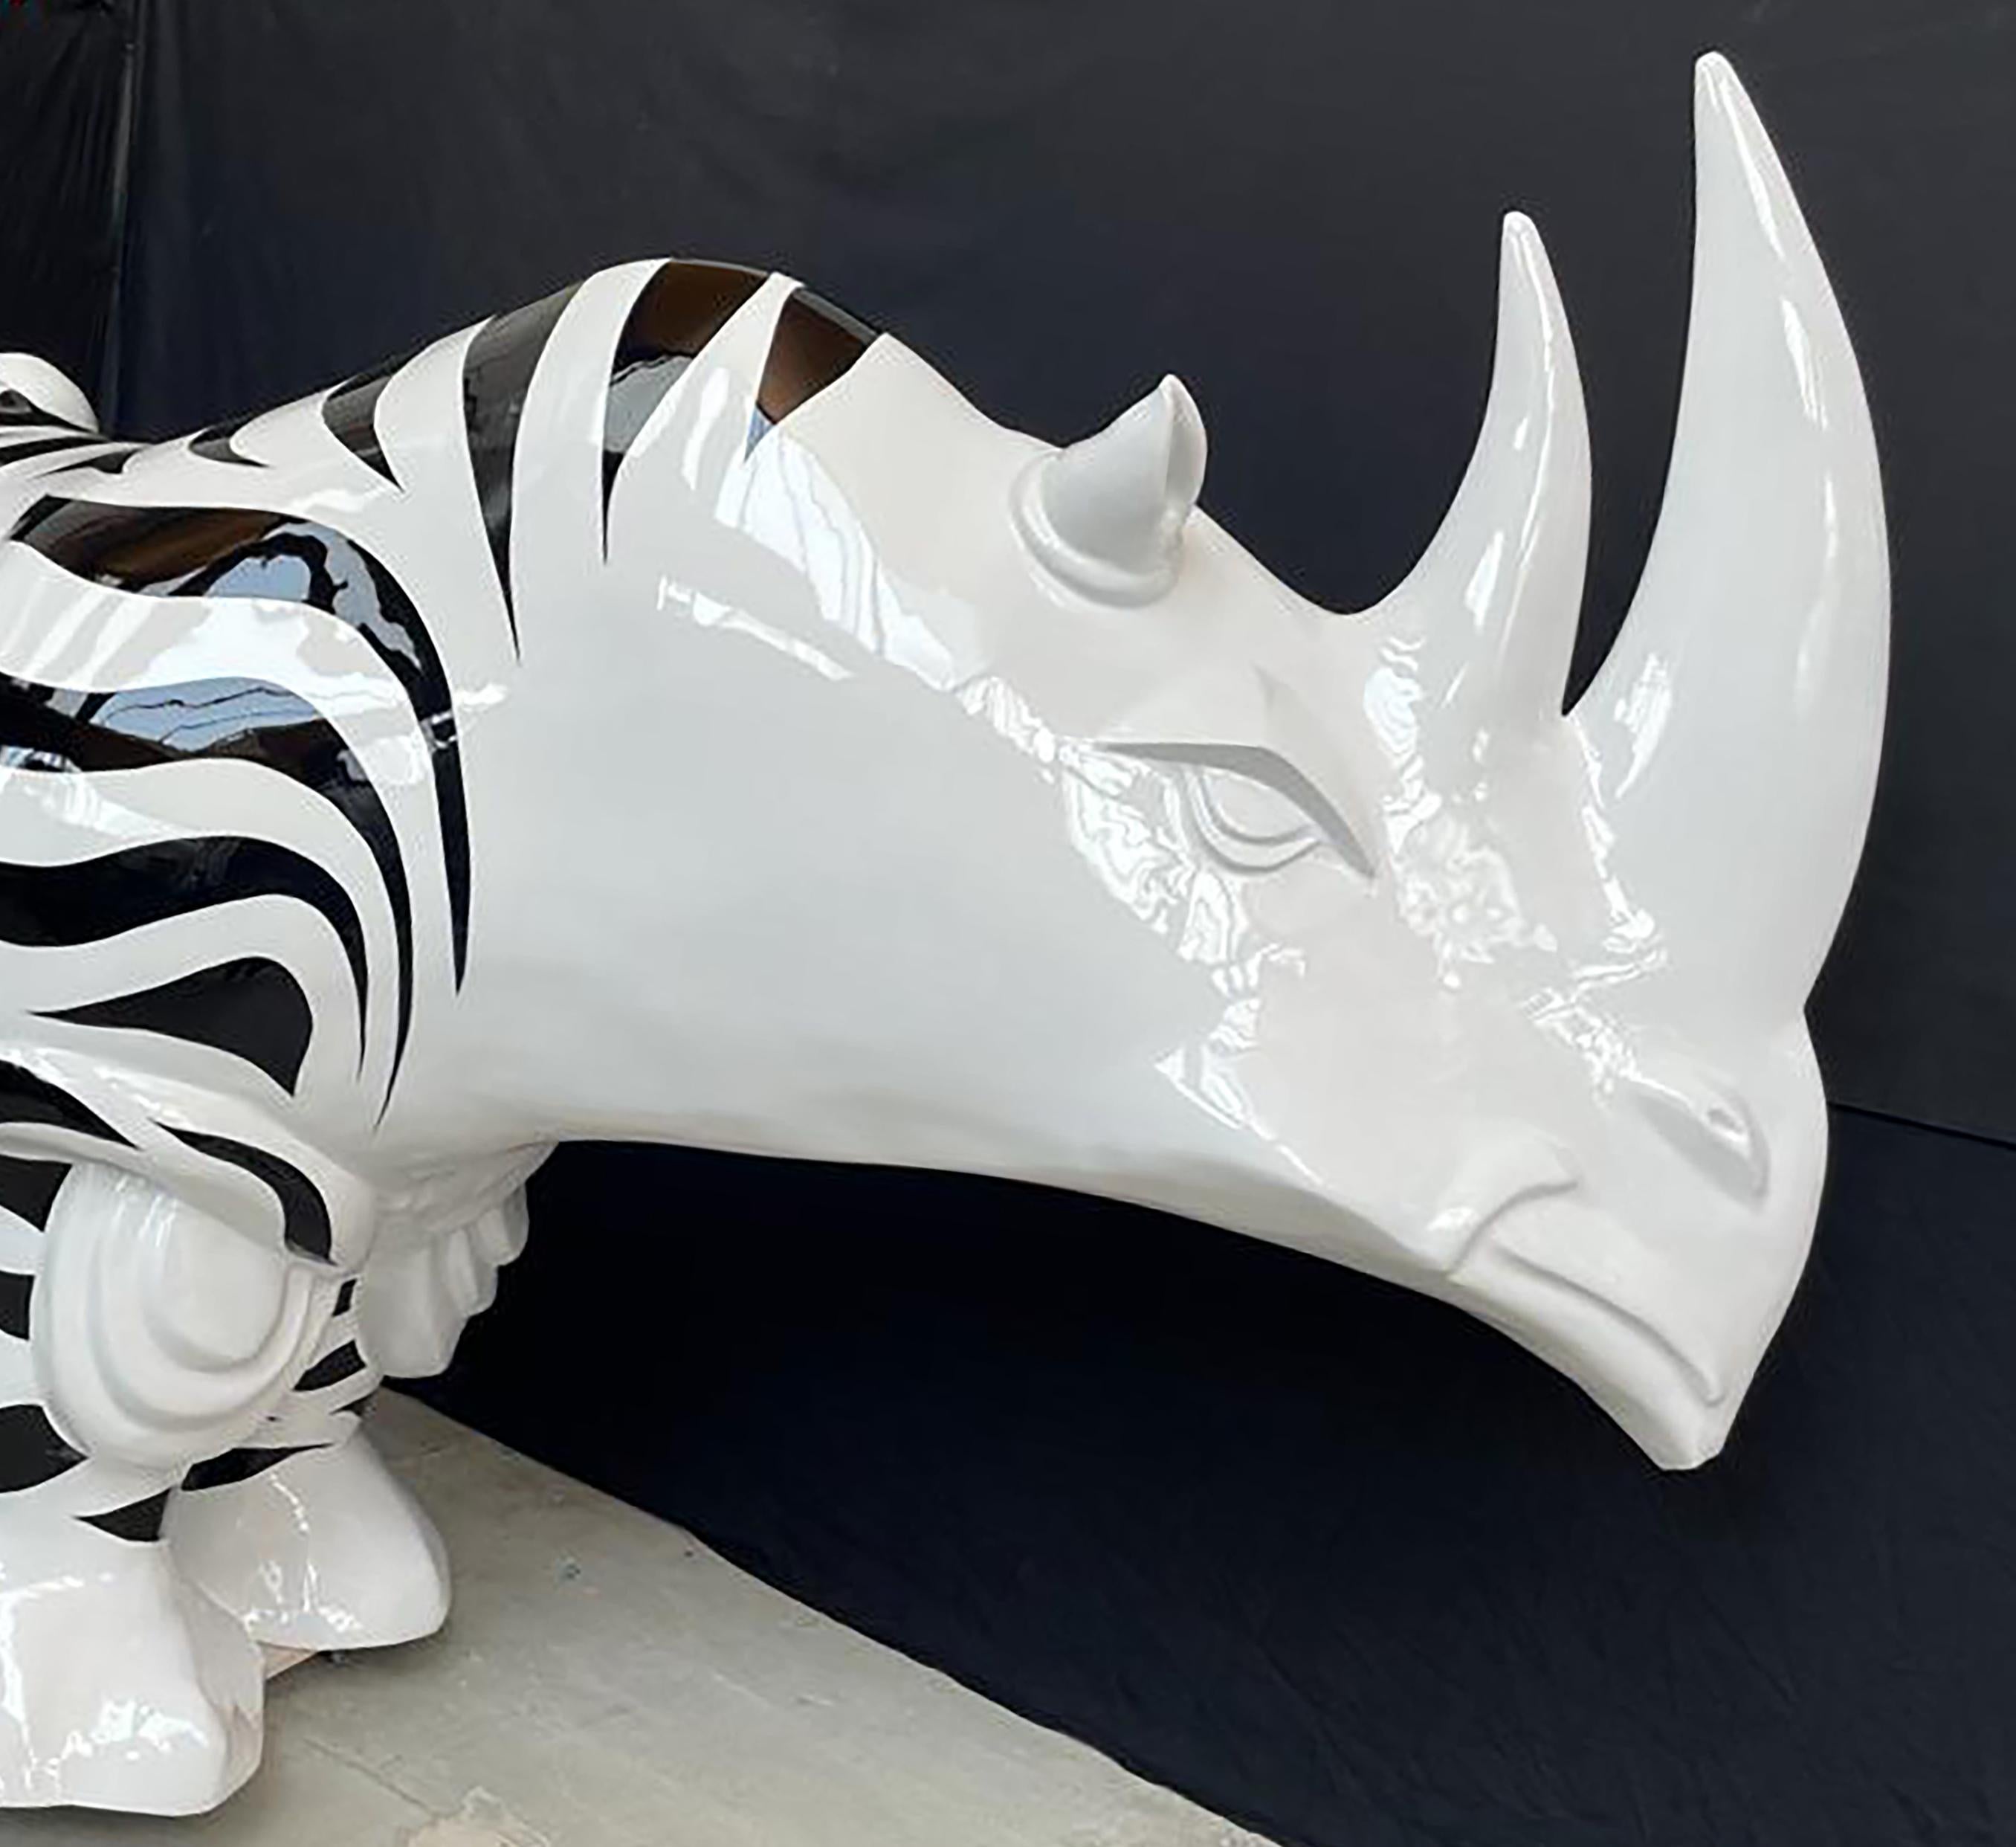 Rhinozebros is a resin sculpture made by Patrick Schumacher, a French contemporary artist. This sculpture represents a rhinoceros adorned with a zebra skin. 
